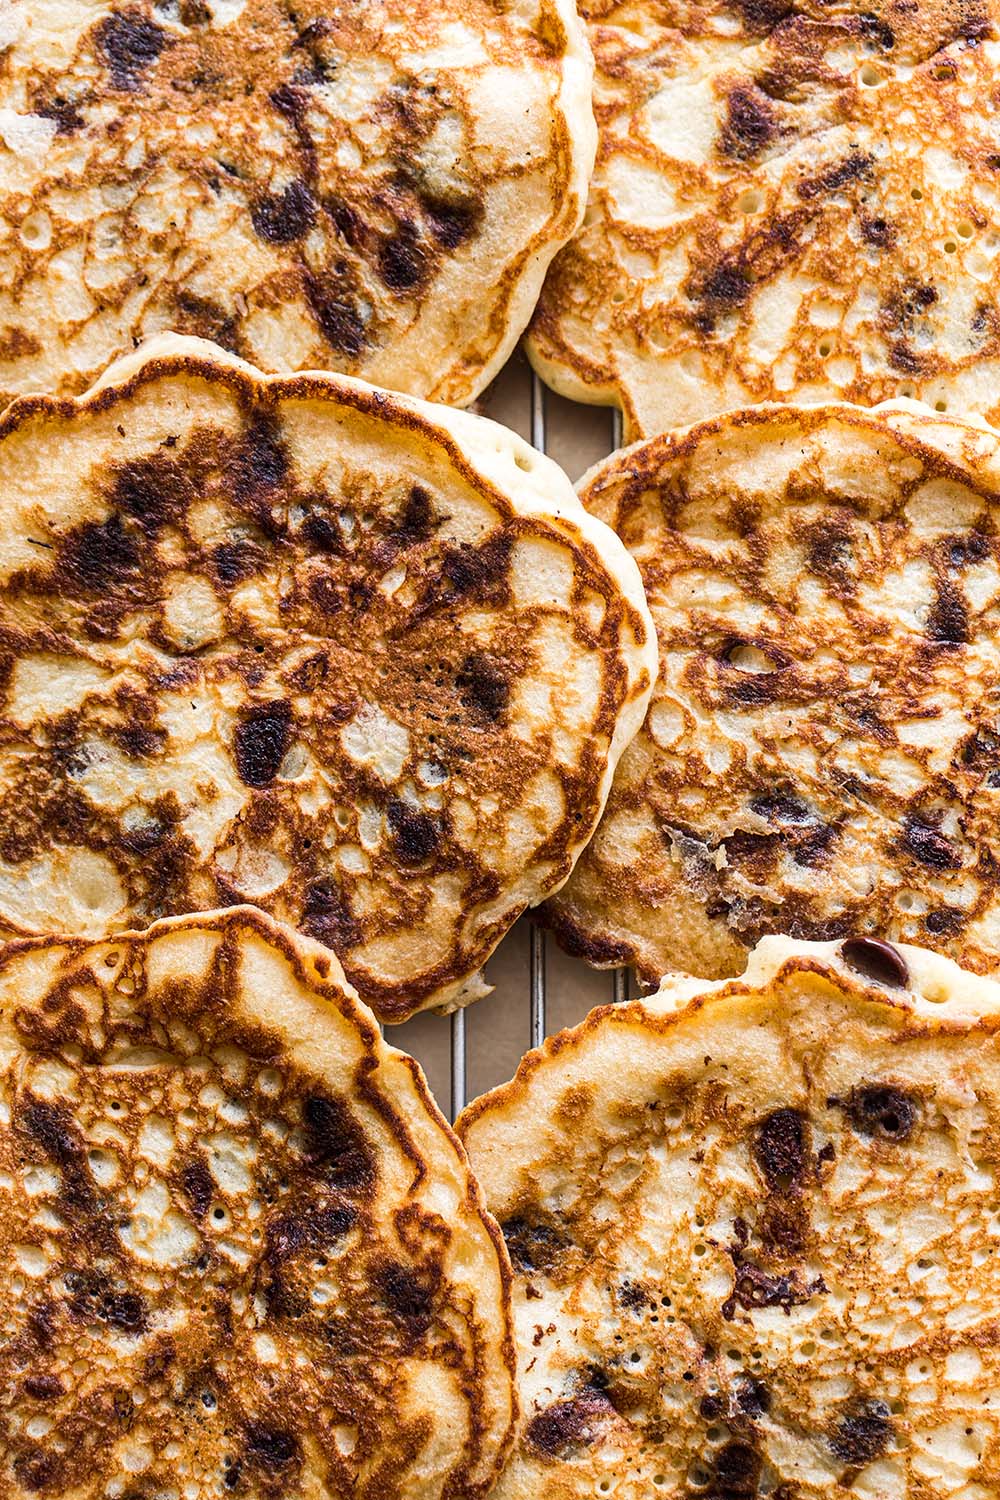 https://handletheheat.com/wp-content/uploads/2021/11/how-to-make-chocolate-chip-pancakes.jpg